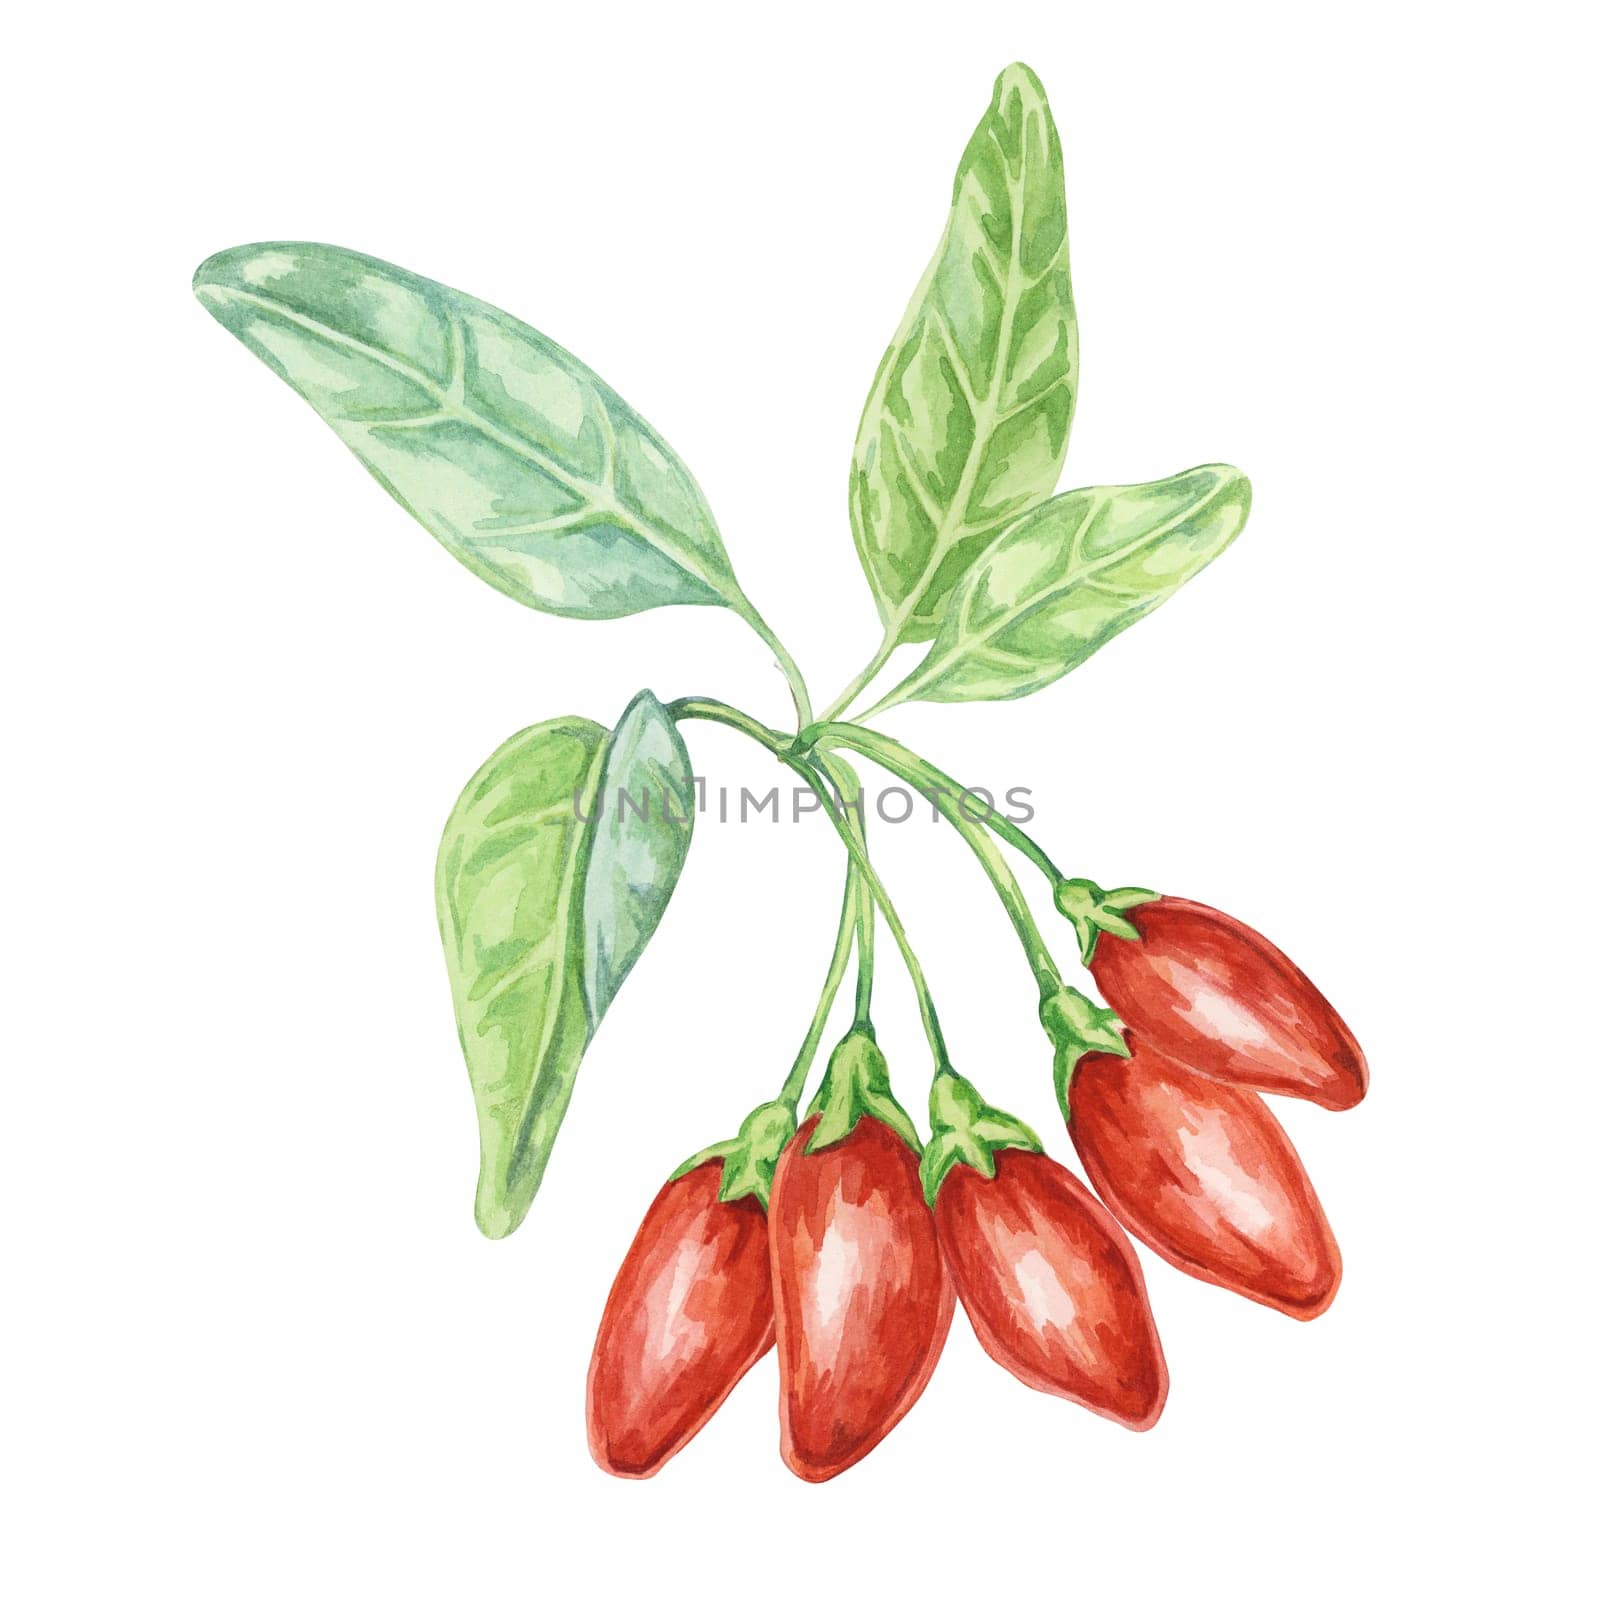 Goji berries on the branch with leaves in watercolor isolated on white background. Hand-drawn clipart of licium barbarum fruits, leaves. Design for printing, packaging, cards, posters